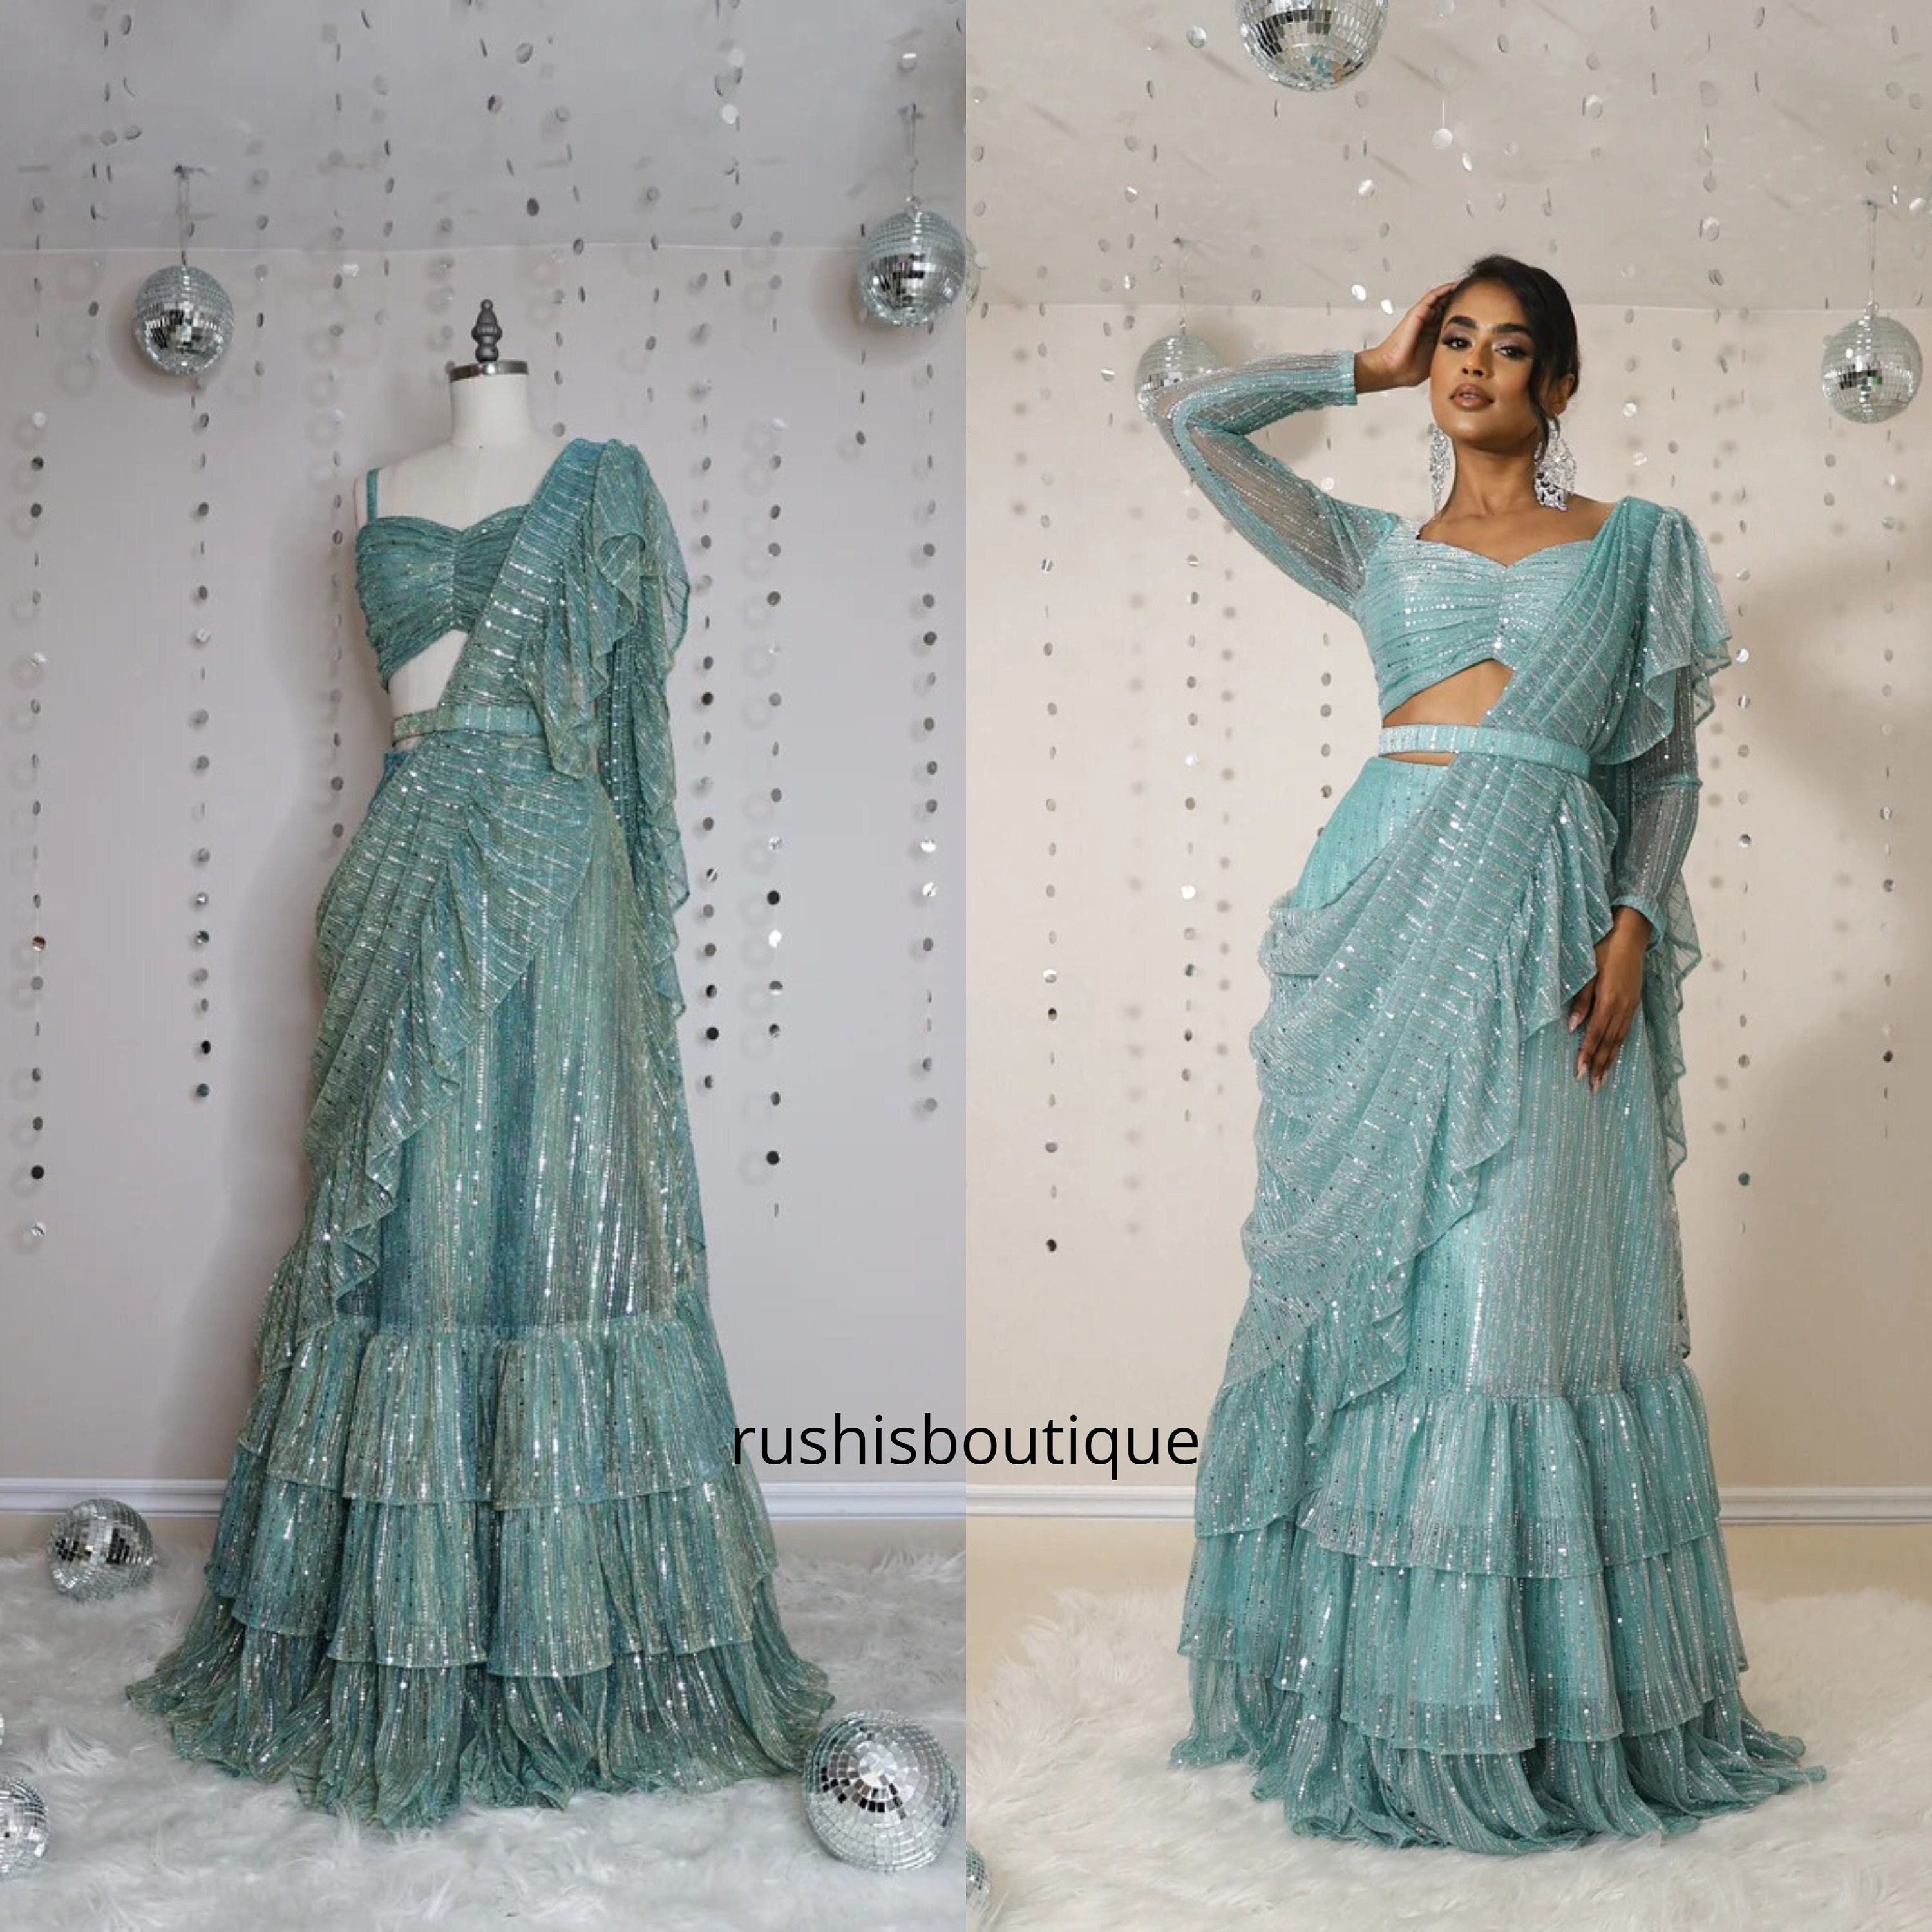 Our Best Selling Saree Silhouettes–